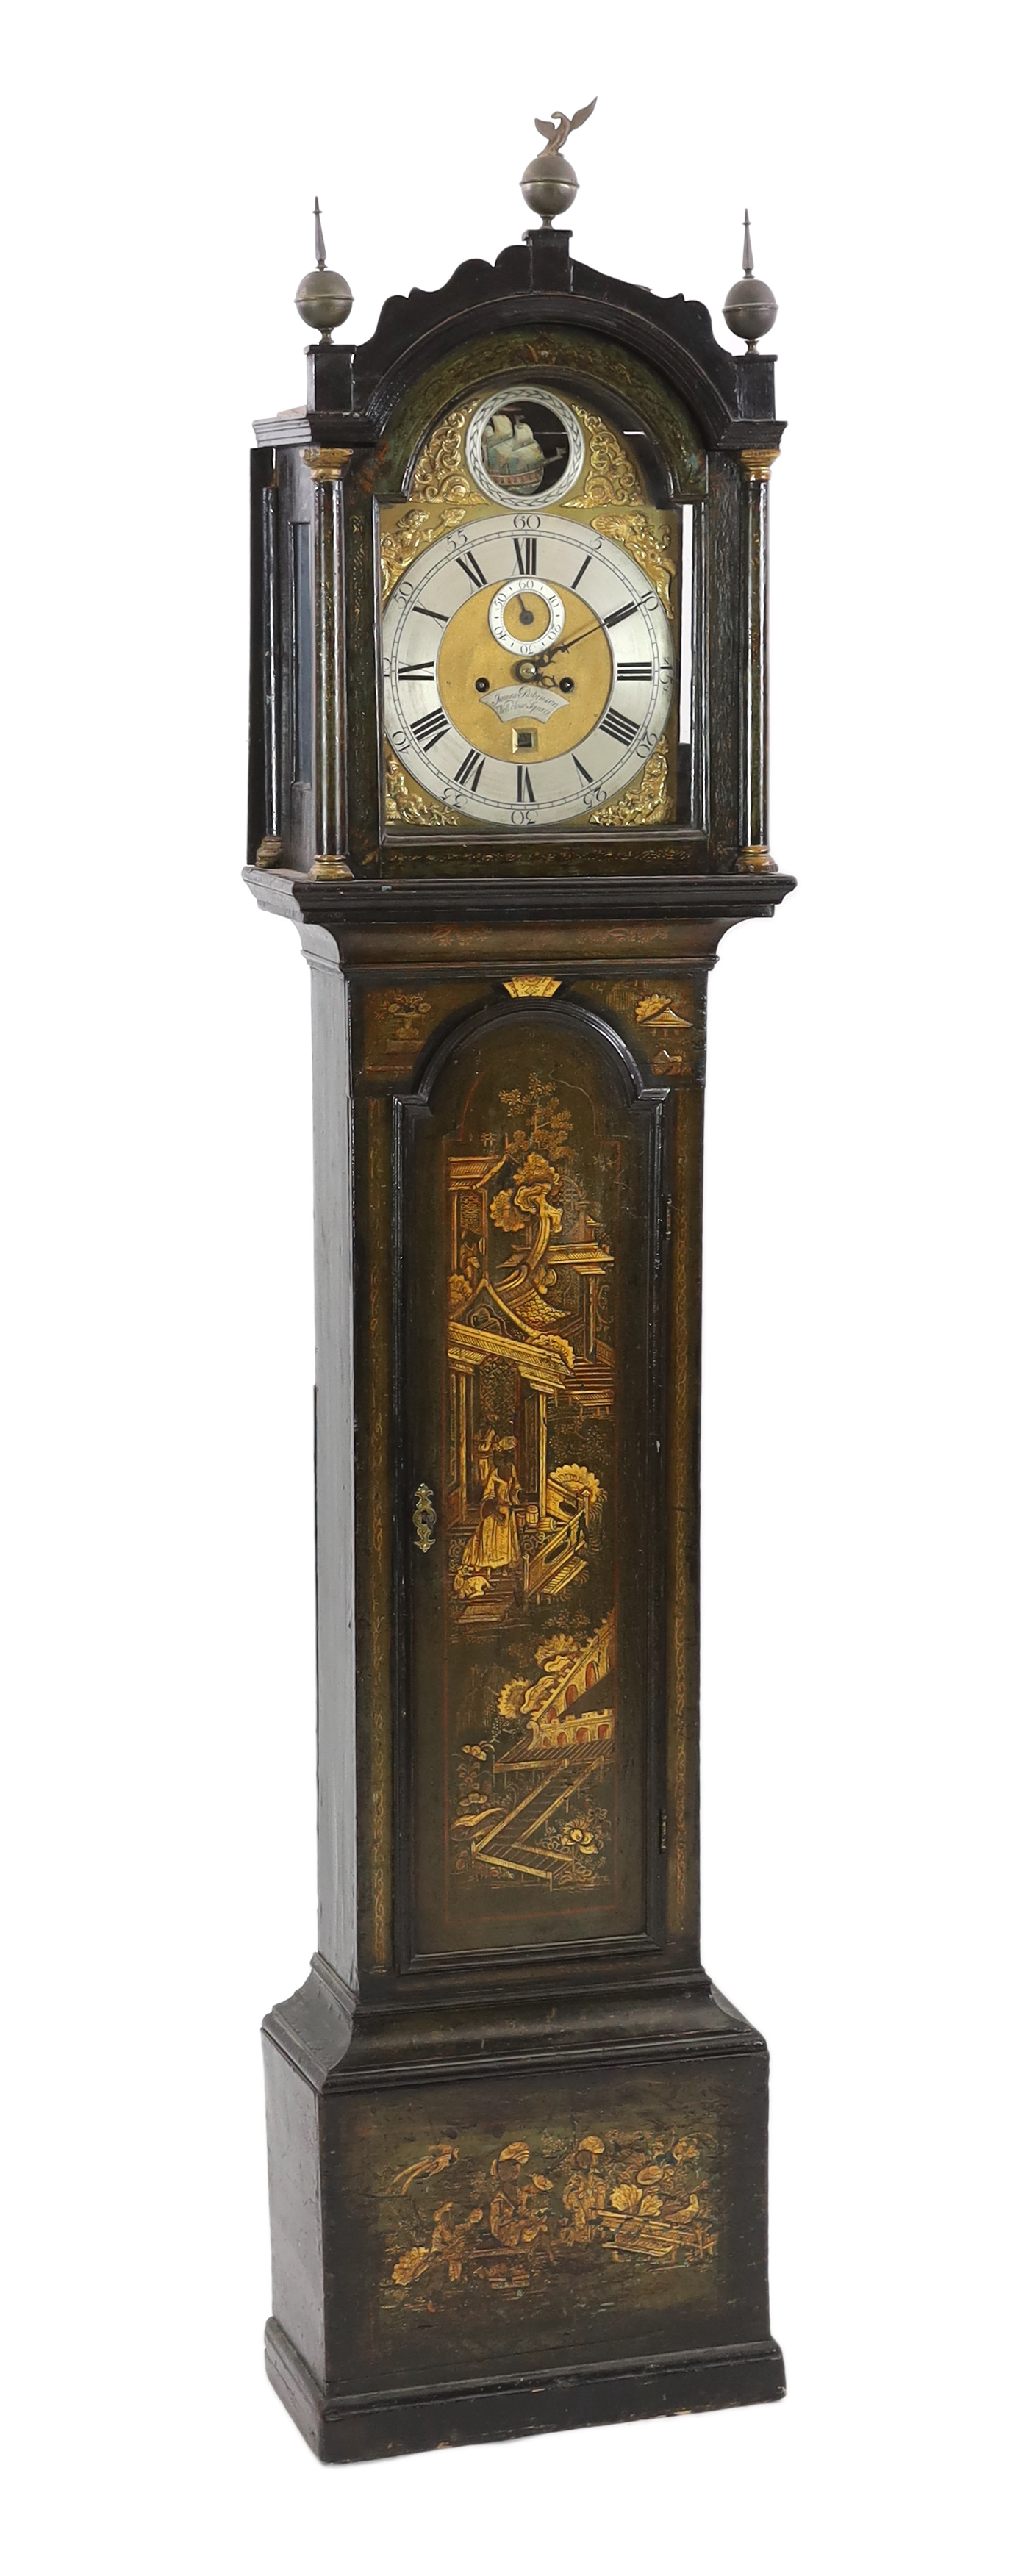 James Robinson of Well Close Square, a George III black japanned eight day longcase clock, 49cm wide, 24cm deep, 223cm high